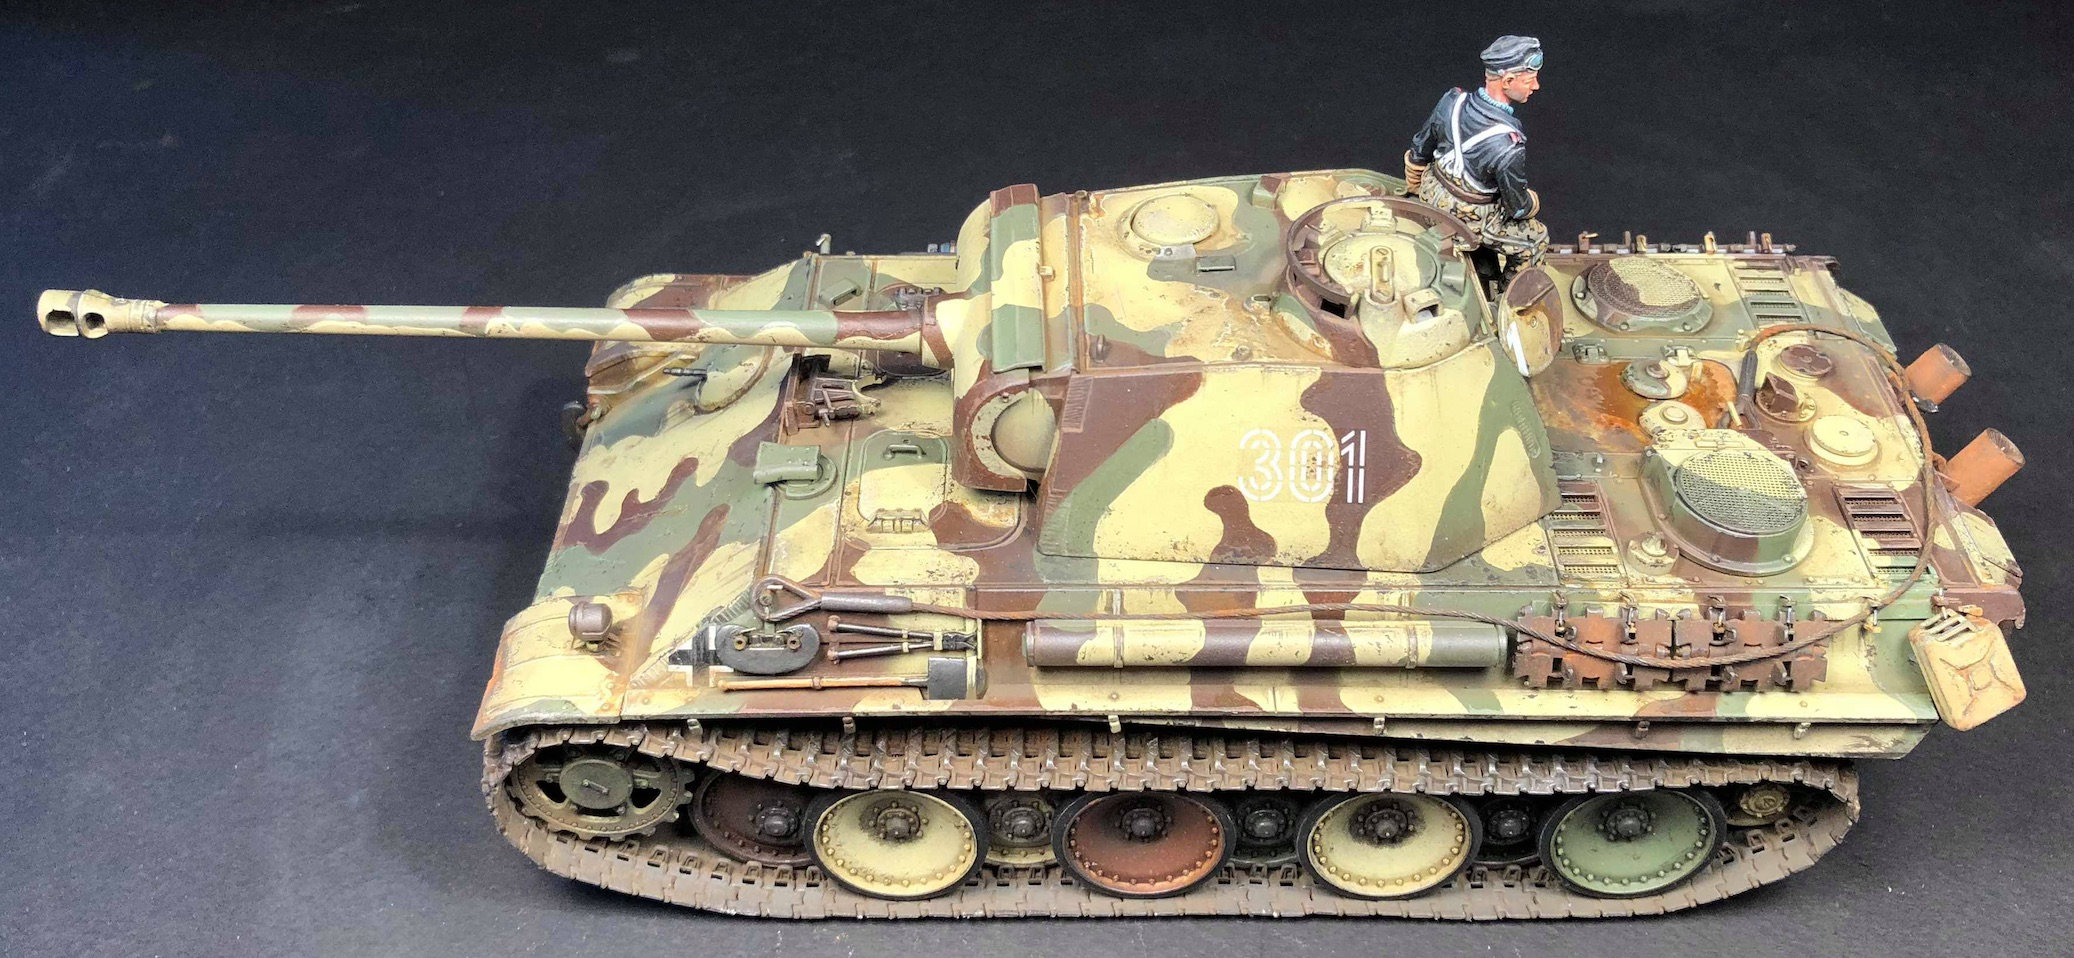 Panther G Tamiya 1/35 - Out of the Box Mj13